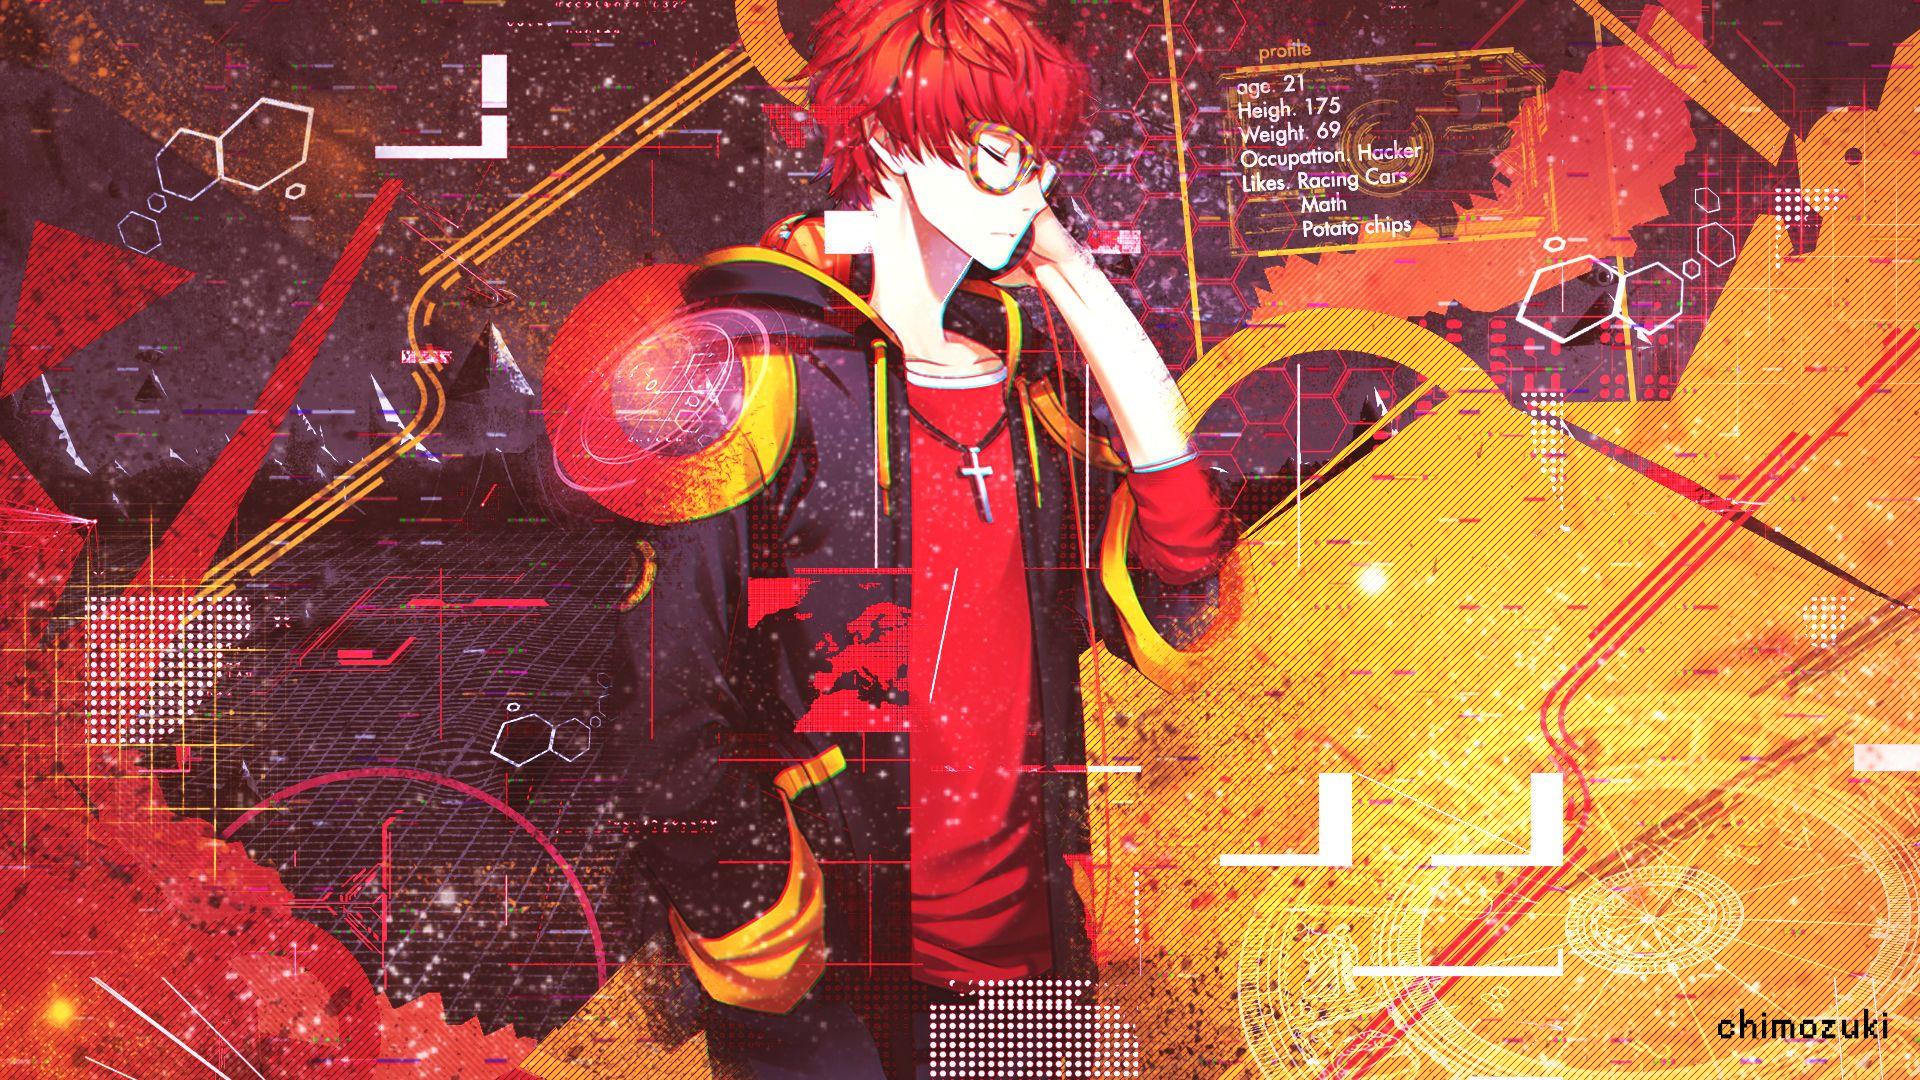 Wallpaper Or Cover Photo On Mystic Messenger